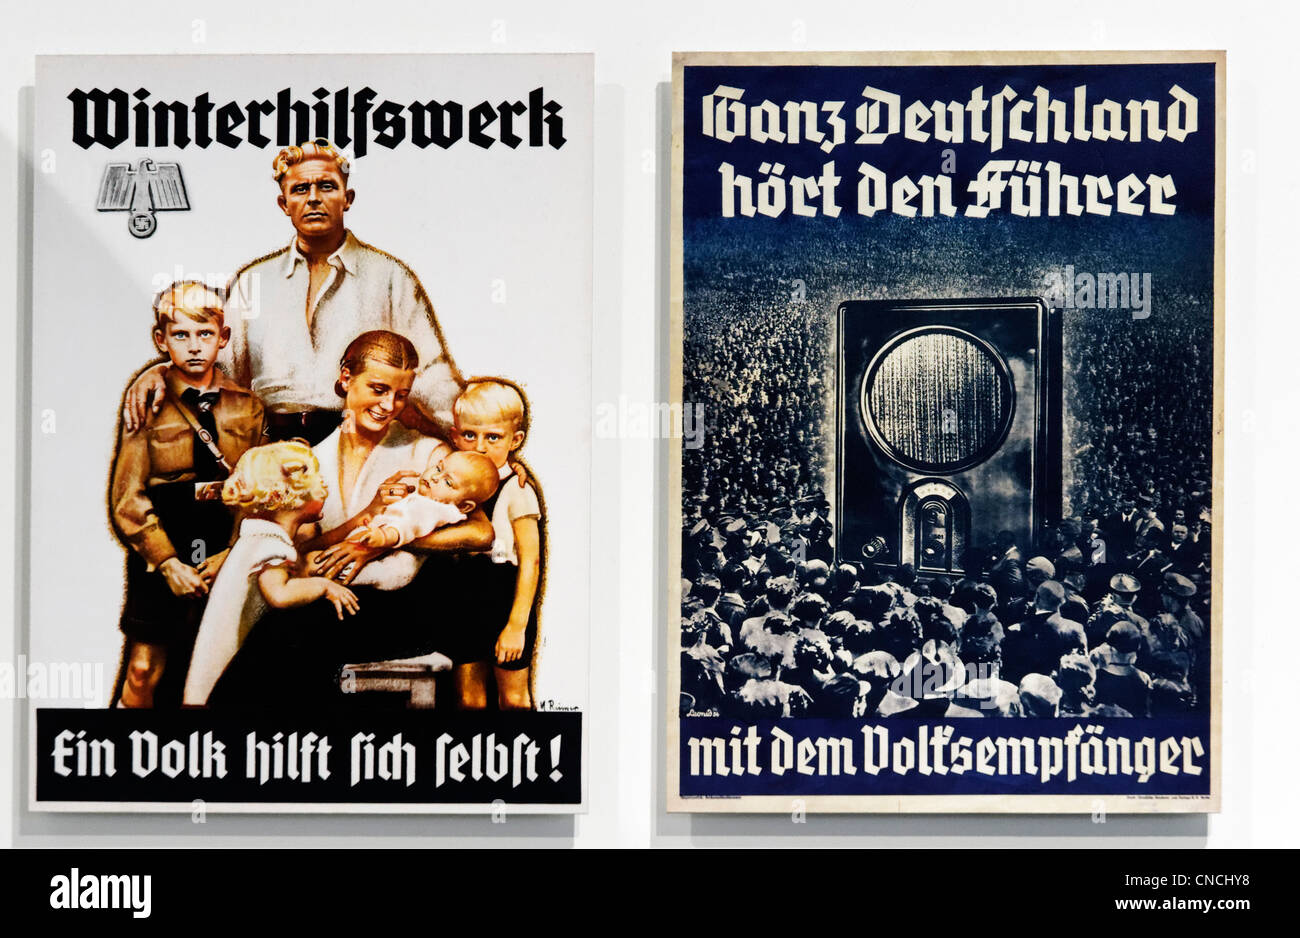 Two nazi german posters promoting family union through the winter aid program and national unity under Hitler Stock Photo